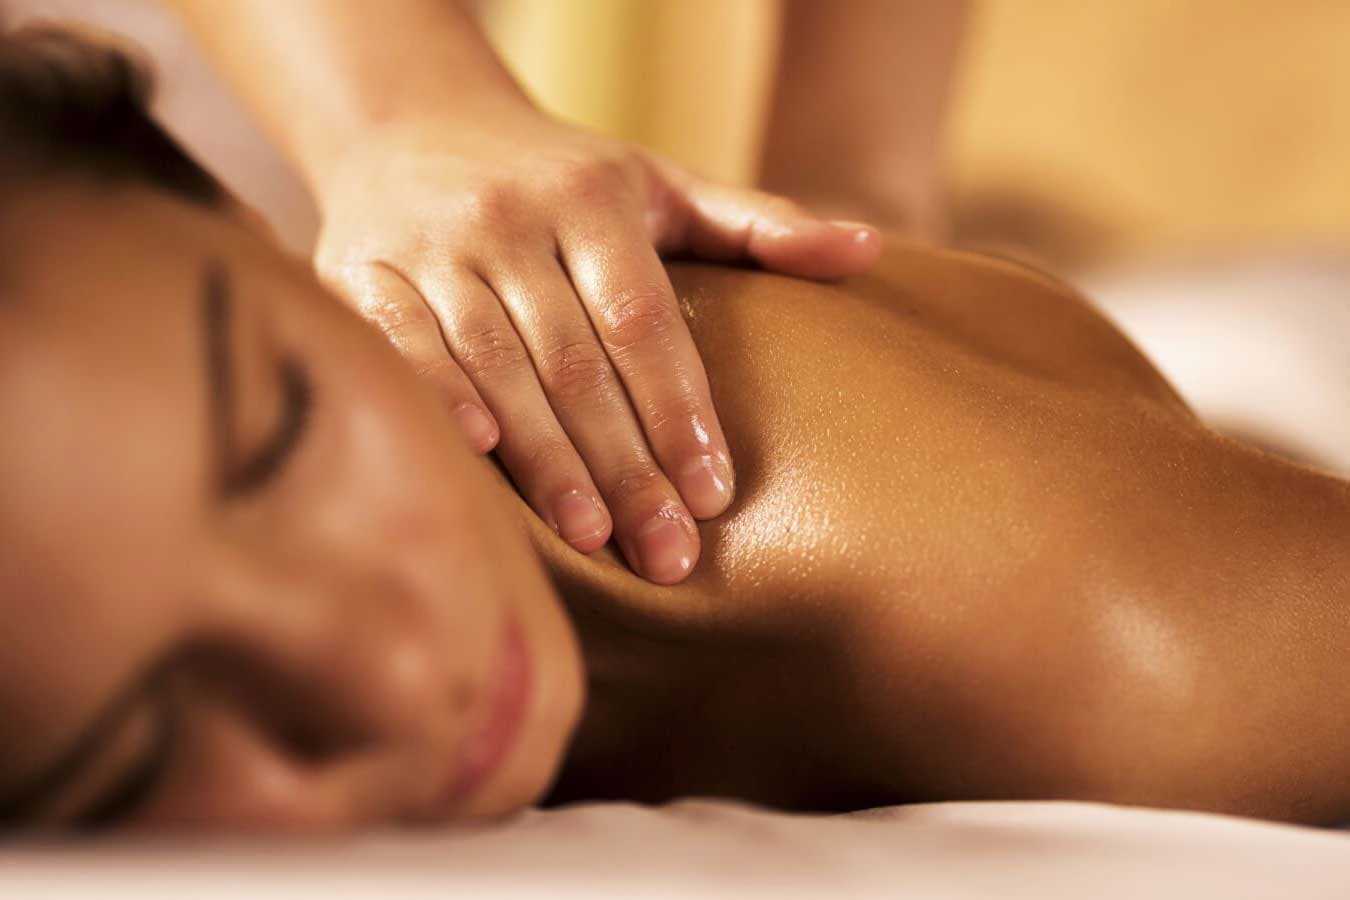 Massage centers provide the best service tantric massage in London